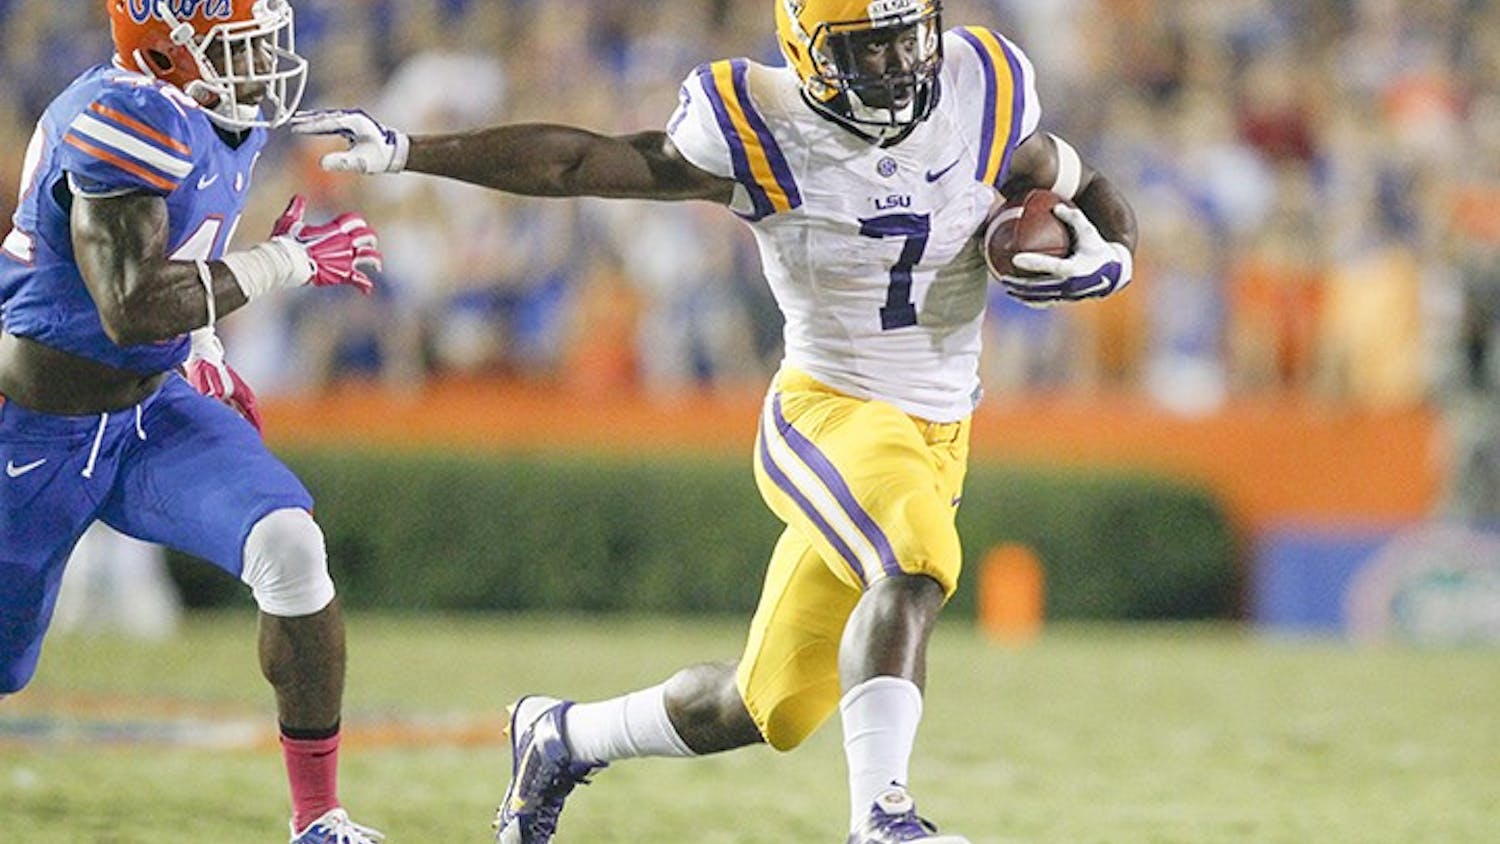 Louisiana State running back Leonard Fournette (7) evades Florida defensive back Keanu Neal (42) at bay during the second quarter at Ben Hill Griffin Stadium in Gainesville, Fla., on Saturday, Oct. 11, 2014. (Eve Edelheit/Tampa Bay Times/MCT)